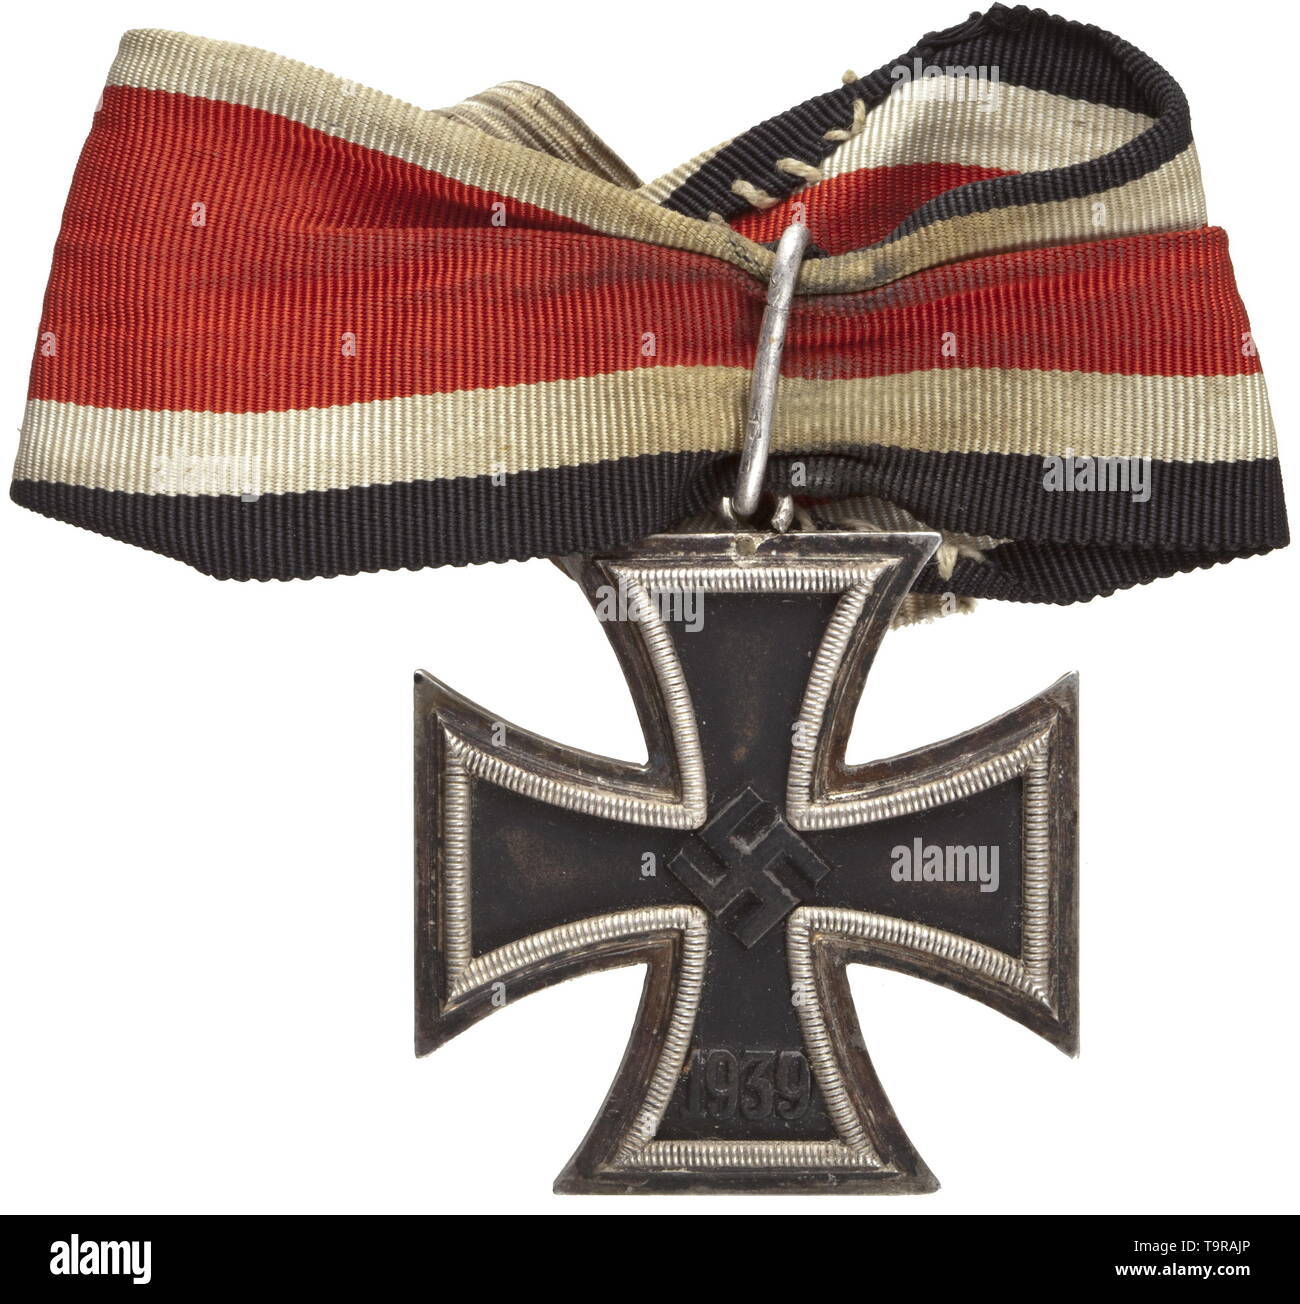 A Knight's Cross of the Iron Cross - front-produced rendition and presentation case of the Korvettenkapitän Georg Pinkepank Modified, worn Knight's Cross of the Iron Cross 2nd Class on the originally customised neck ribbon. The ring on the Iron Cross twisted, the suspension ring bent into a vertical oval shape, the neck ribbon stitched with an elastic band. With a further Knight's Cross neck ribbon and presentation case (the hinge covering somewhat damaged) with rounded corners and embossed lines. Includes two extracts from Pinkepank's certificate book from the Deutsche Sch, Editorial-Use-Only Stock Photo